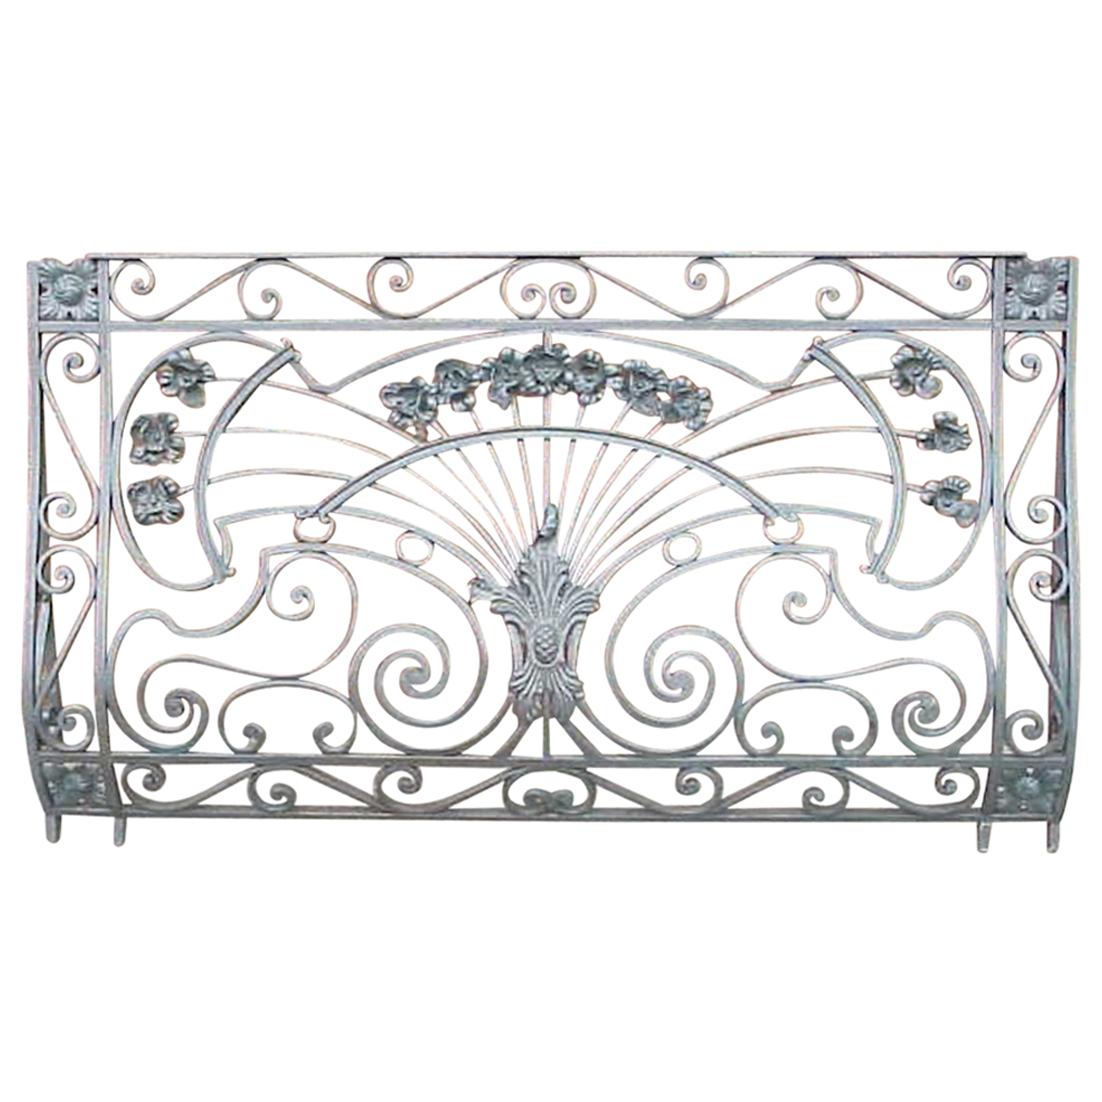 Victor Horta Style of an Art Nouveau Hand Wrought Iron Floral Balcony Railing